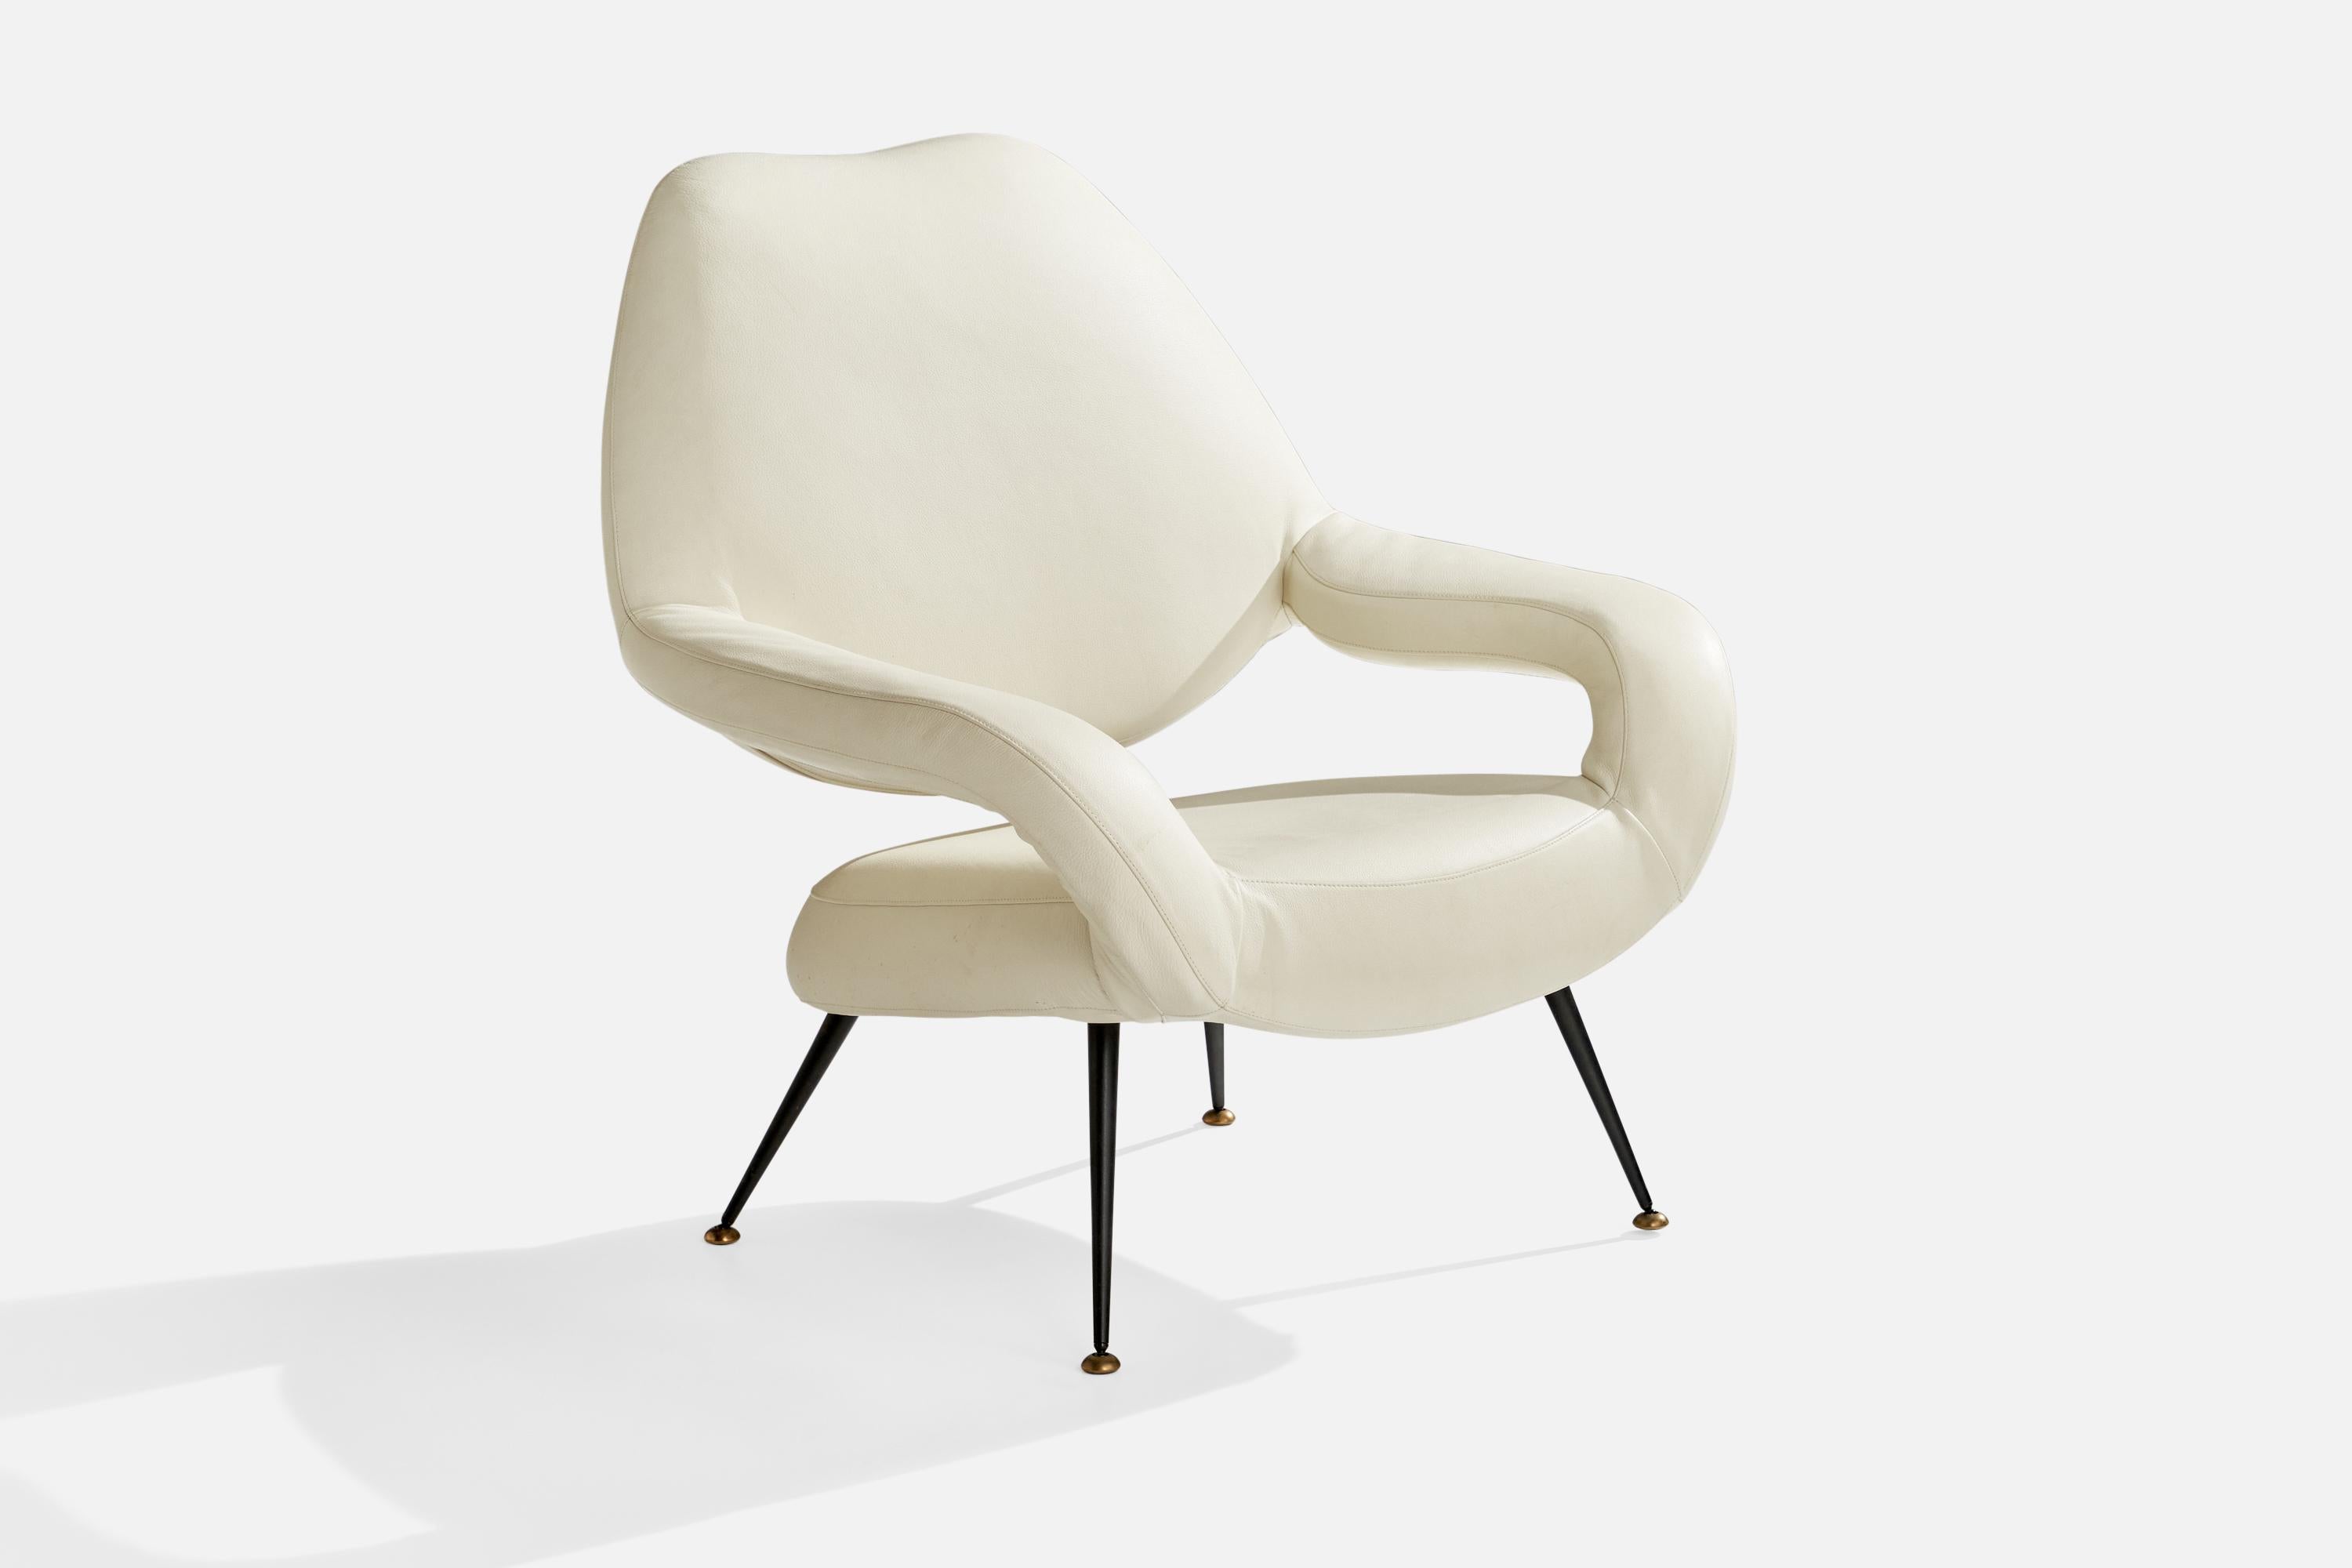 A white leather, brass and metal lounge chair, Model DU55a, designed by Gastone Rinaldi c. 1955 and produced by Poltrona Frau, Italy, 1990s.

Seat height 15.5”.